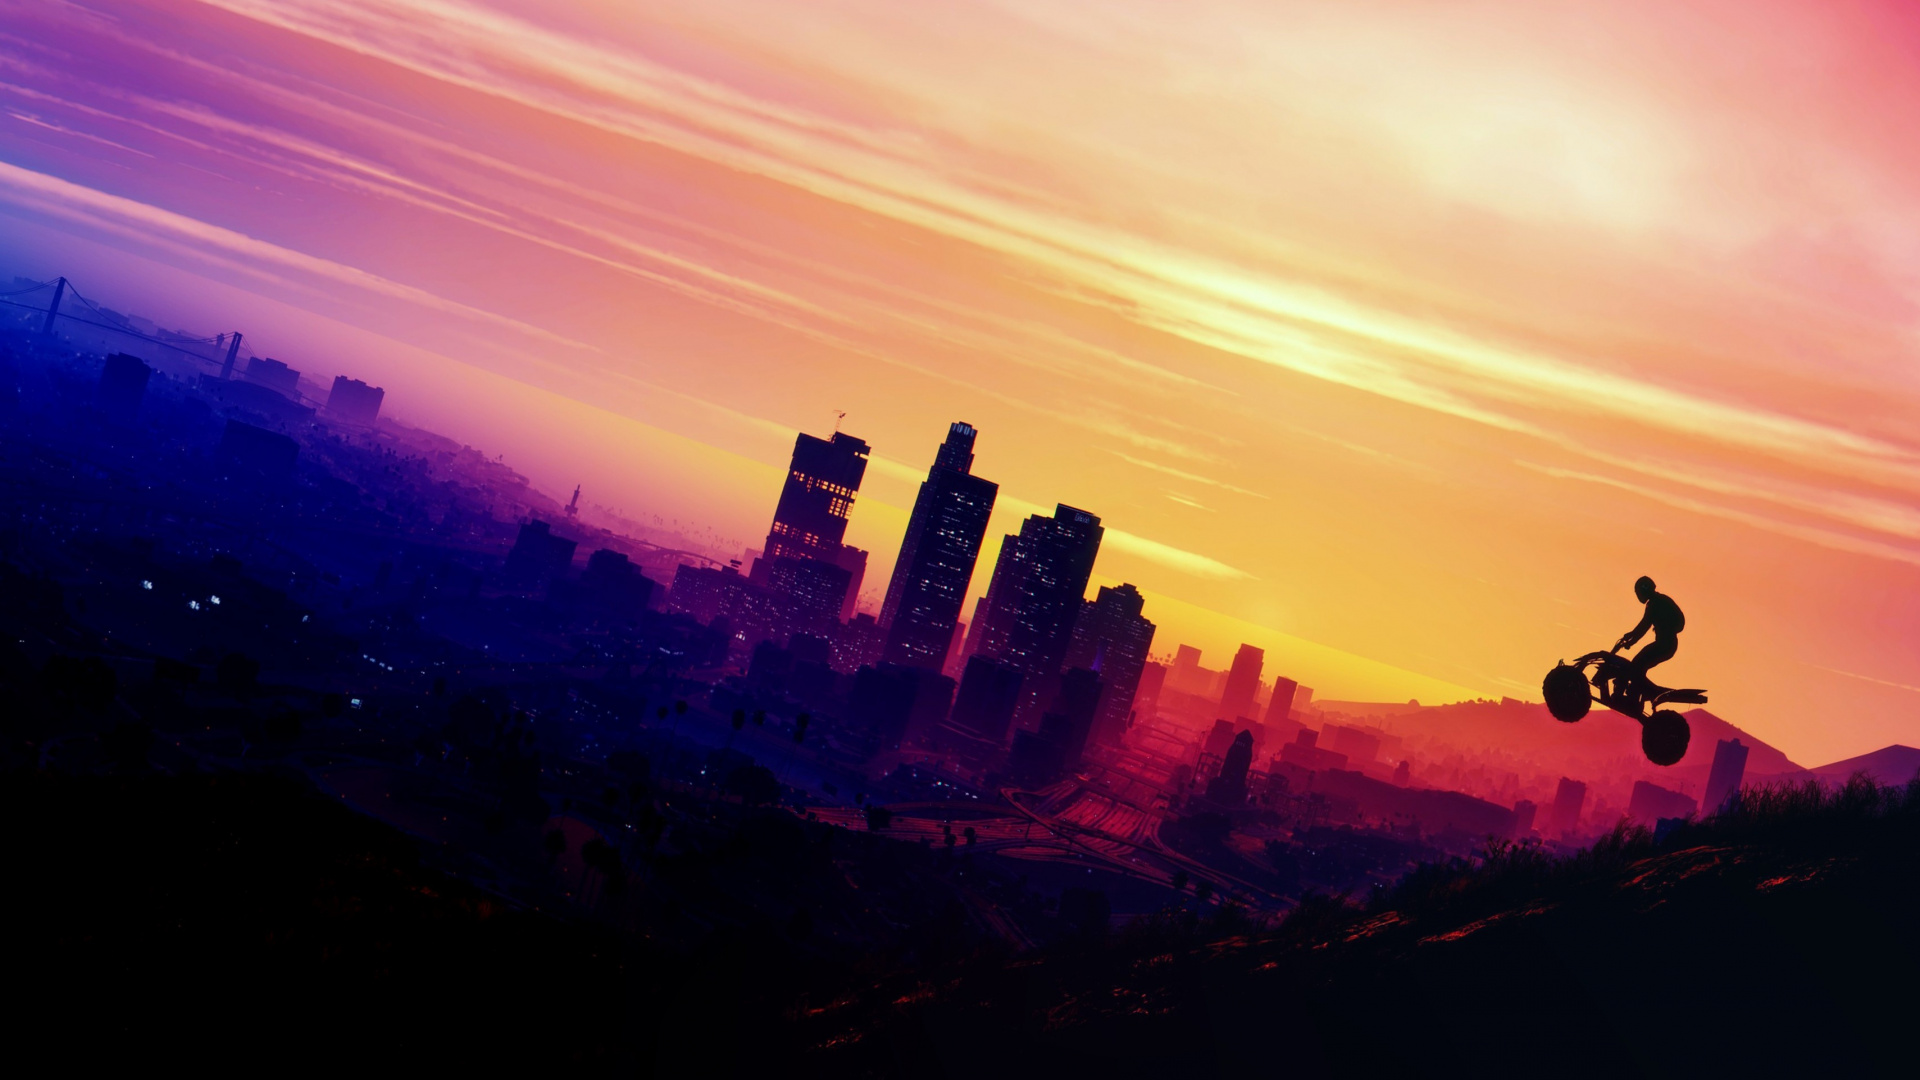 Grand Theft Auto v, Grand Theft Auto San Andreas, Horizon, Afterglow, Sunset. Wallpaper in 1920x1080 Resolution